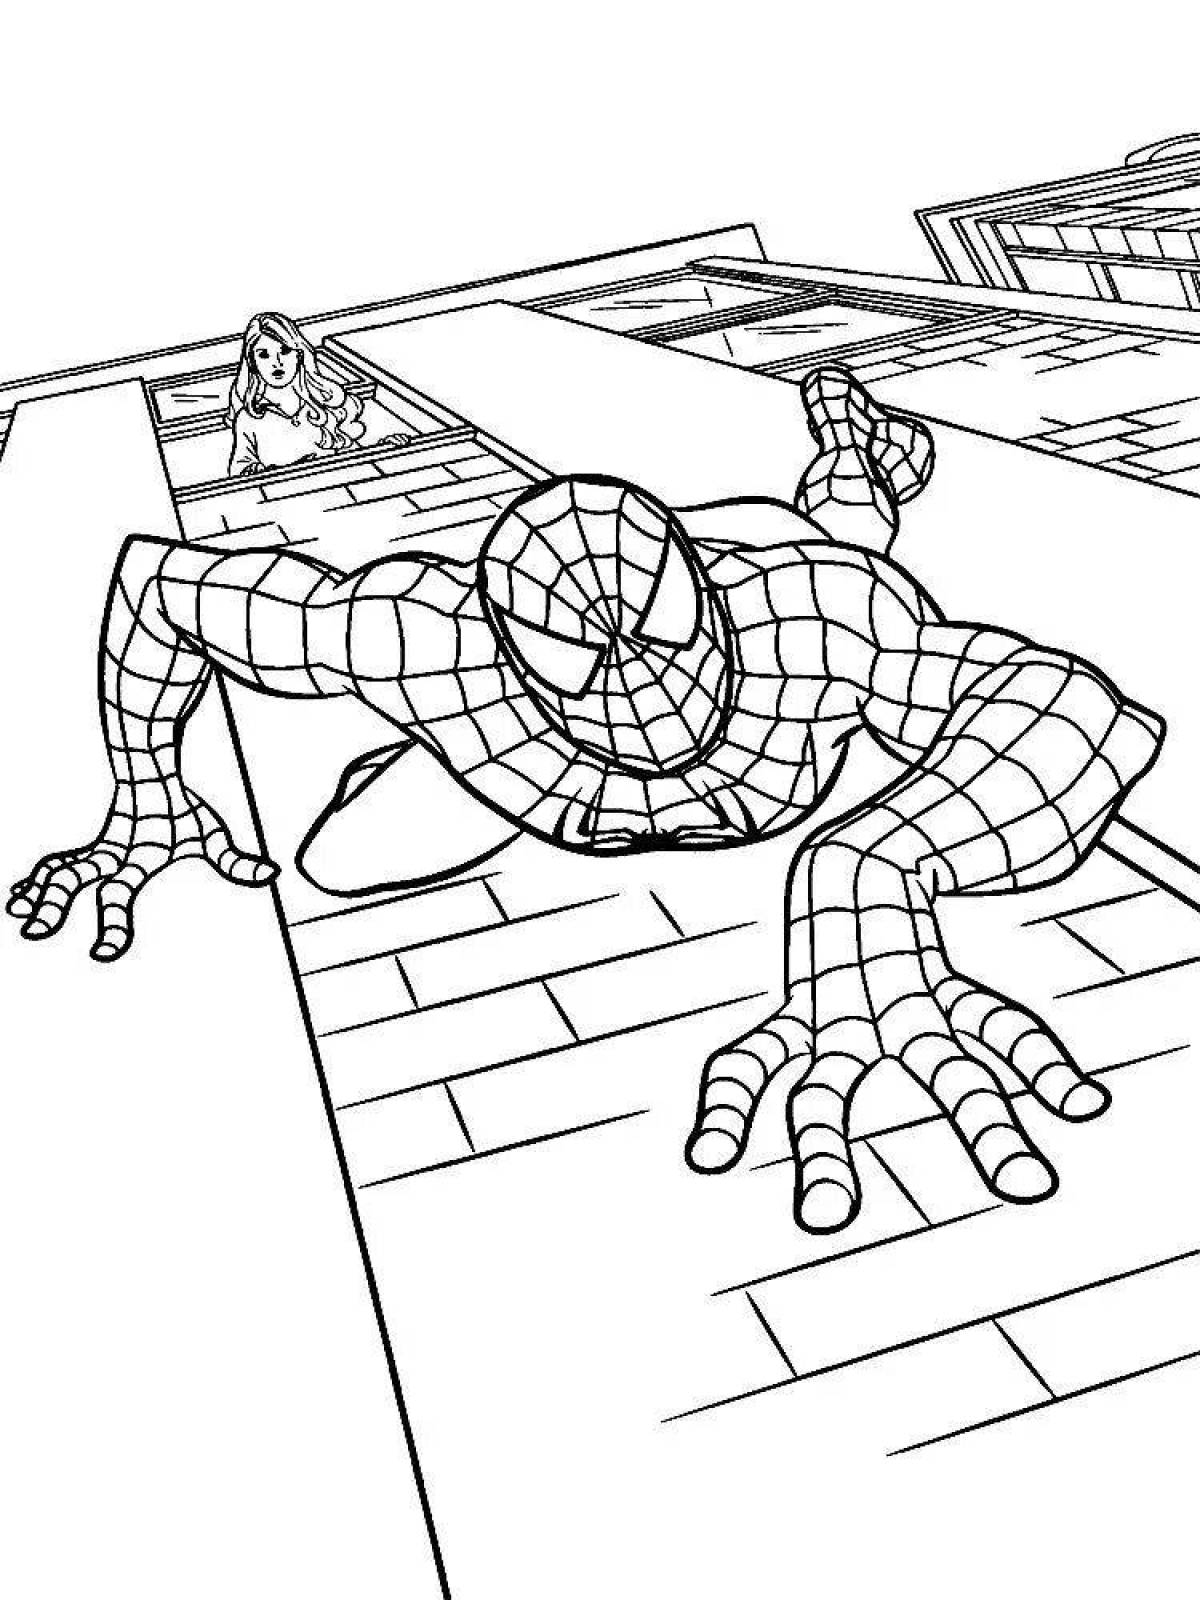 Shining Spiderman coloring pages for kids